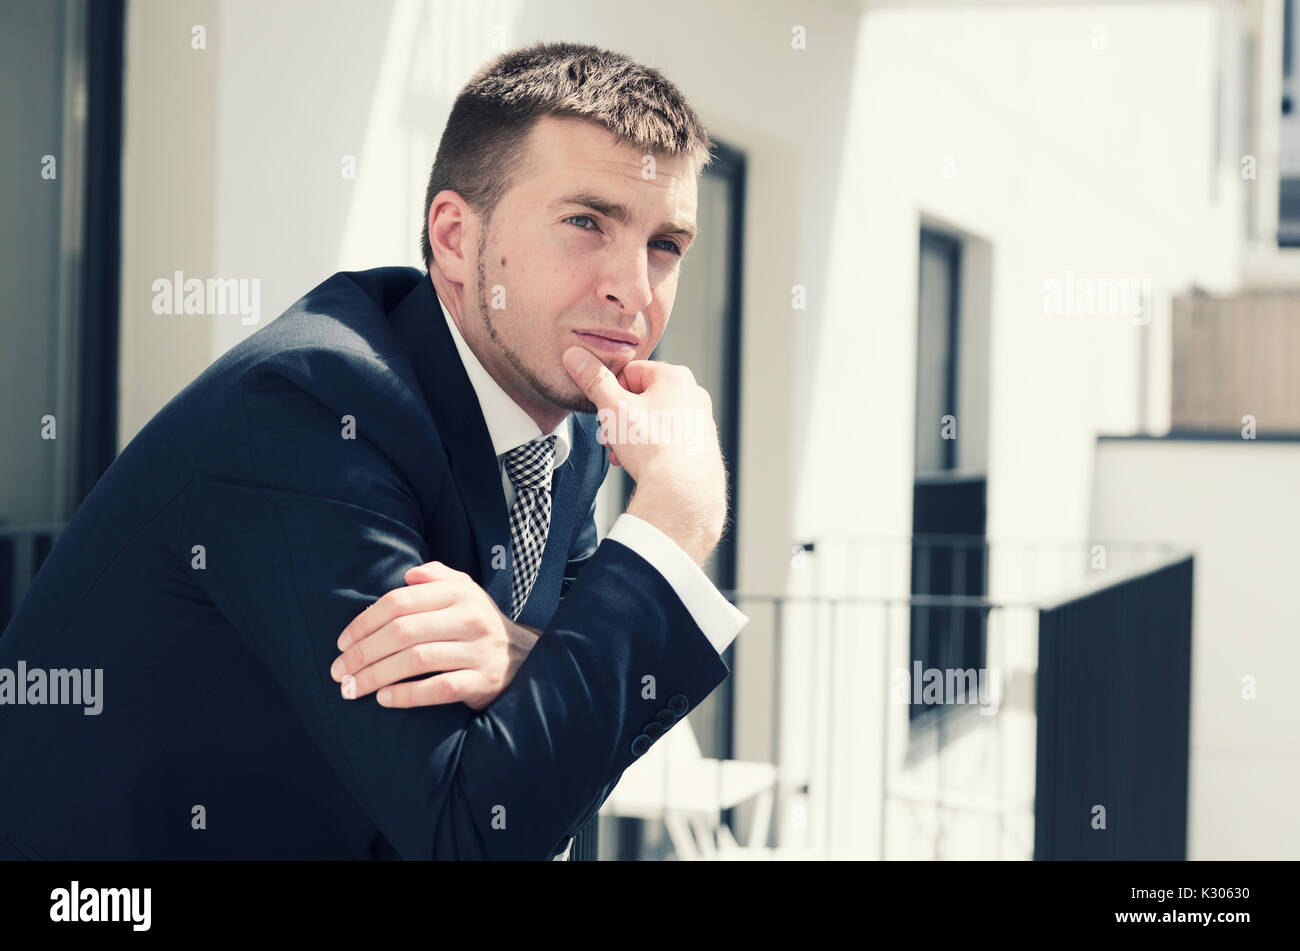 Handsome businessman enjoying view of the city from a balcony. businessman apartment handsome city style people caucasian balcony concept Stock Photo